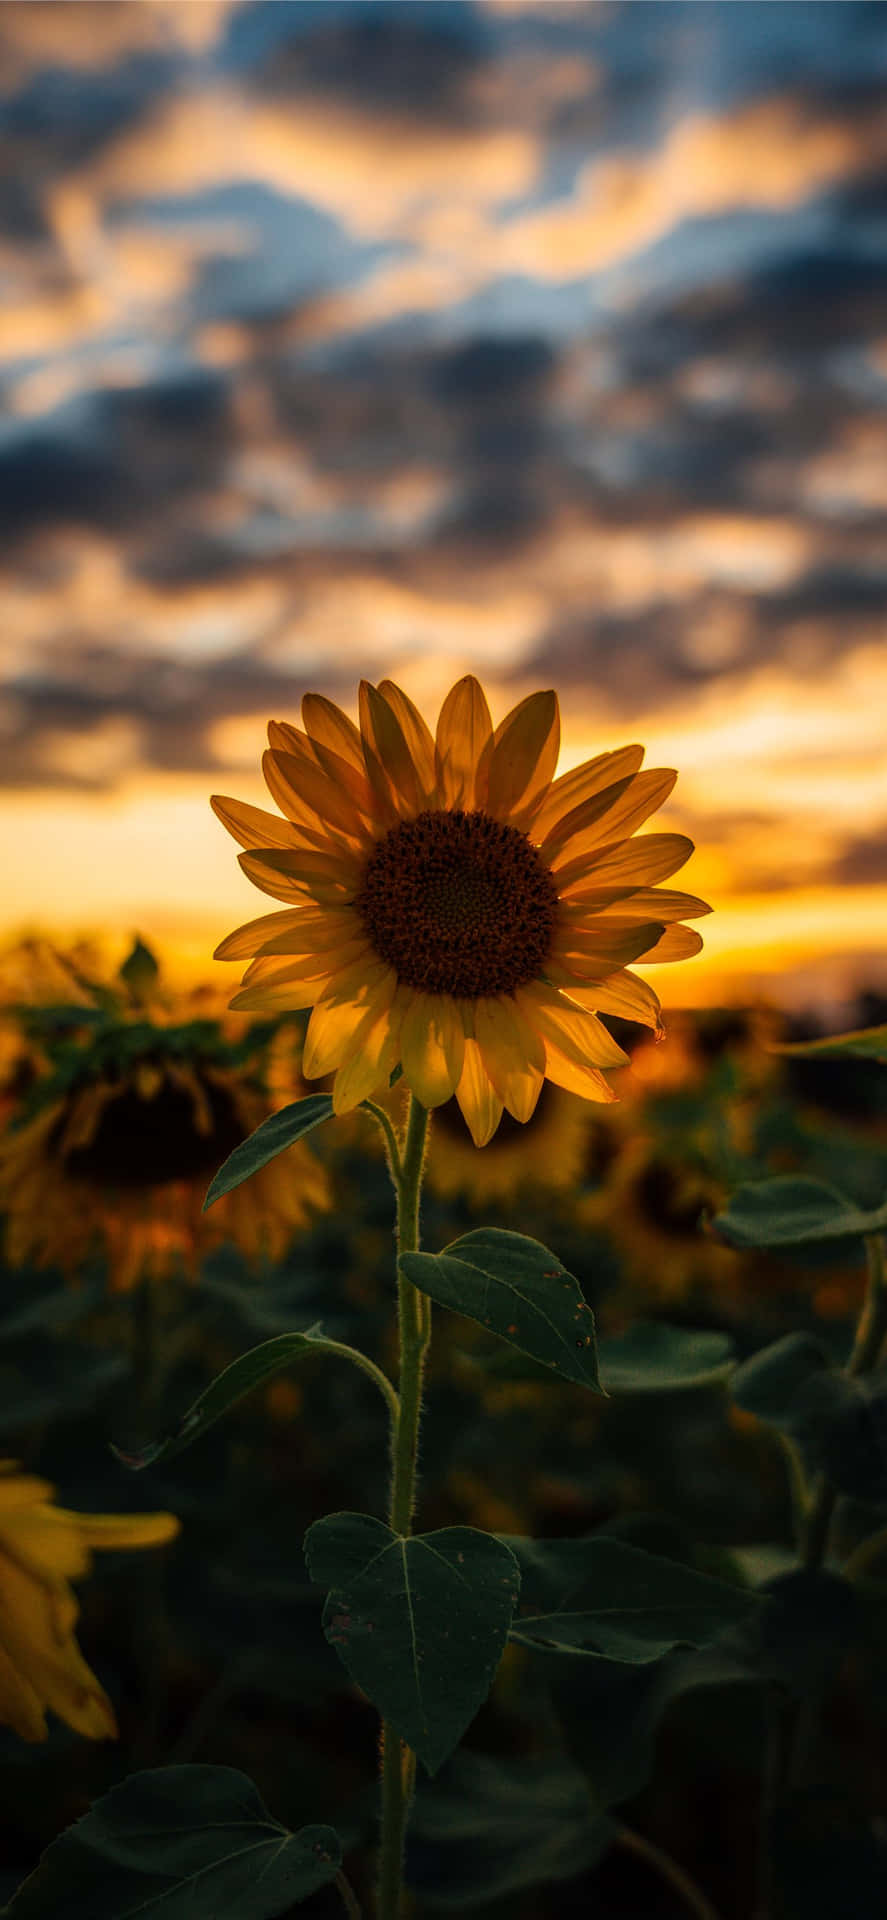 Enjoy the beauty of a sunflower with this sunflower aesthetic iPhone wallpaper. Wallpaper